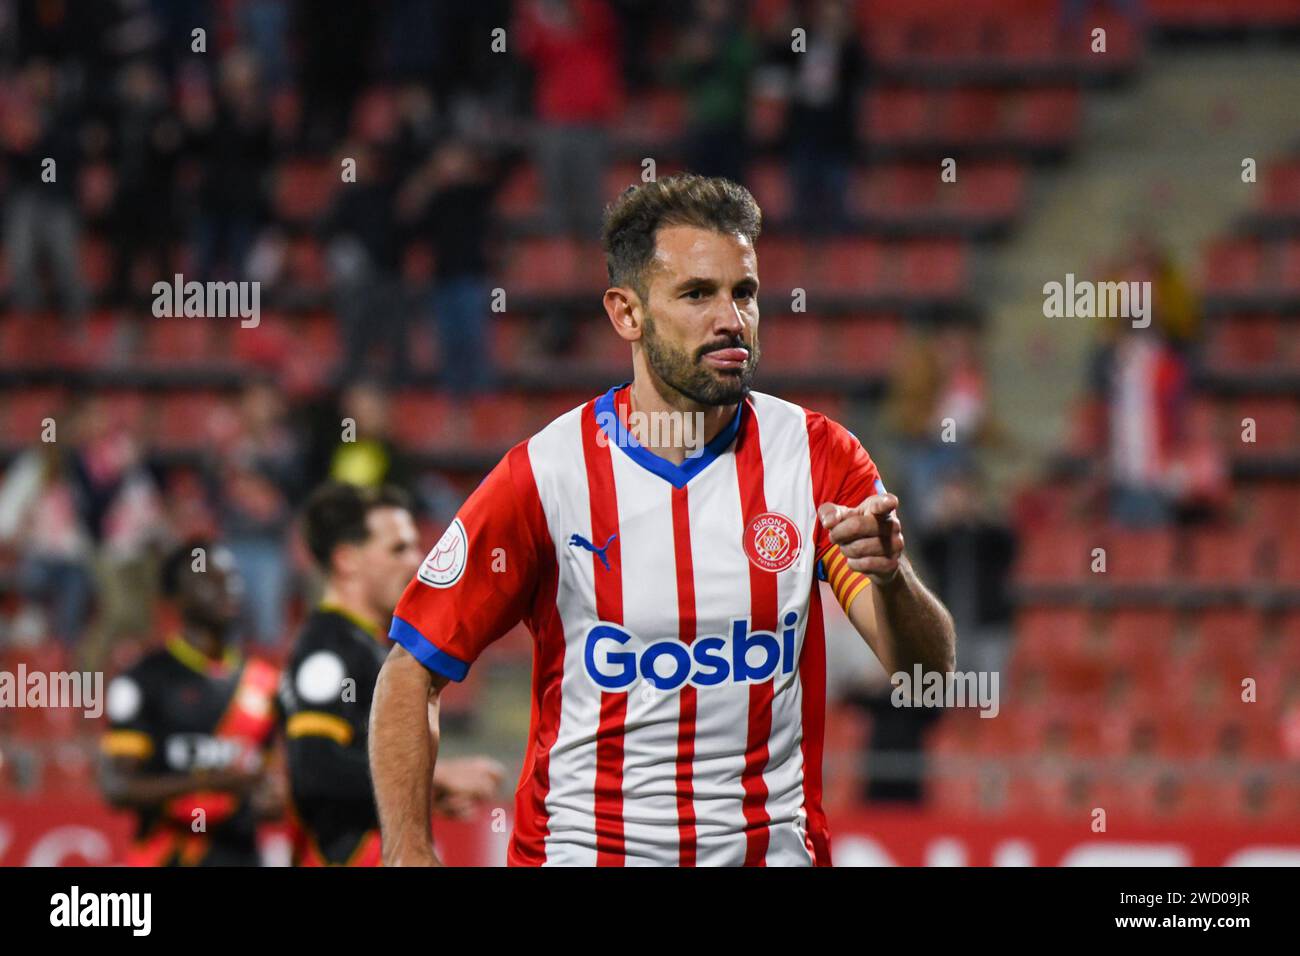 Girona, Spain. 17th Jan, 2024. GIRONA, SPAIN - JANUARY 17: Player of Girona FC Cristhian Stuani celebrates after scoring a goal during the match between Girona FC and Raya Vallecano as part of round 16 of Copa del Rey at Estadio Montilivi on January 17, 2024 in Girona, Spain. (Photo by Sara Aribó/PxImages) Credit: Px Images/Alamy Live News Stock Photo